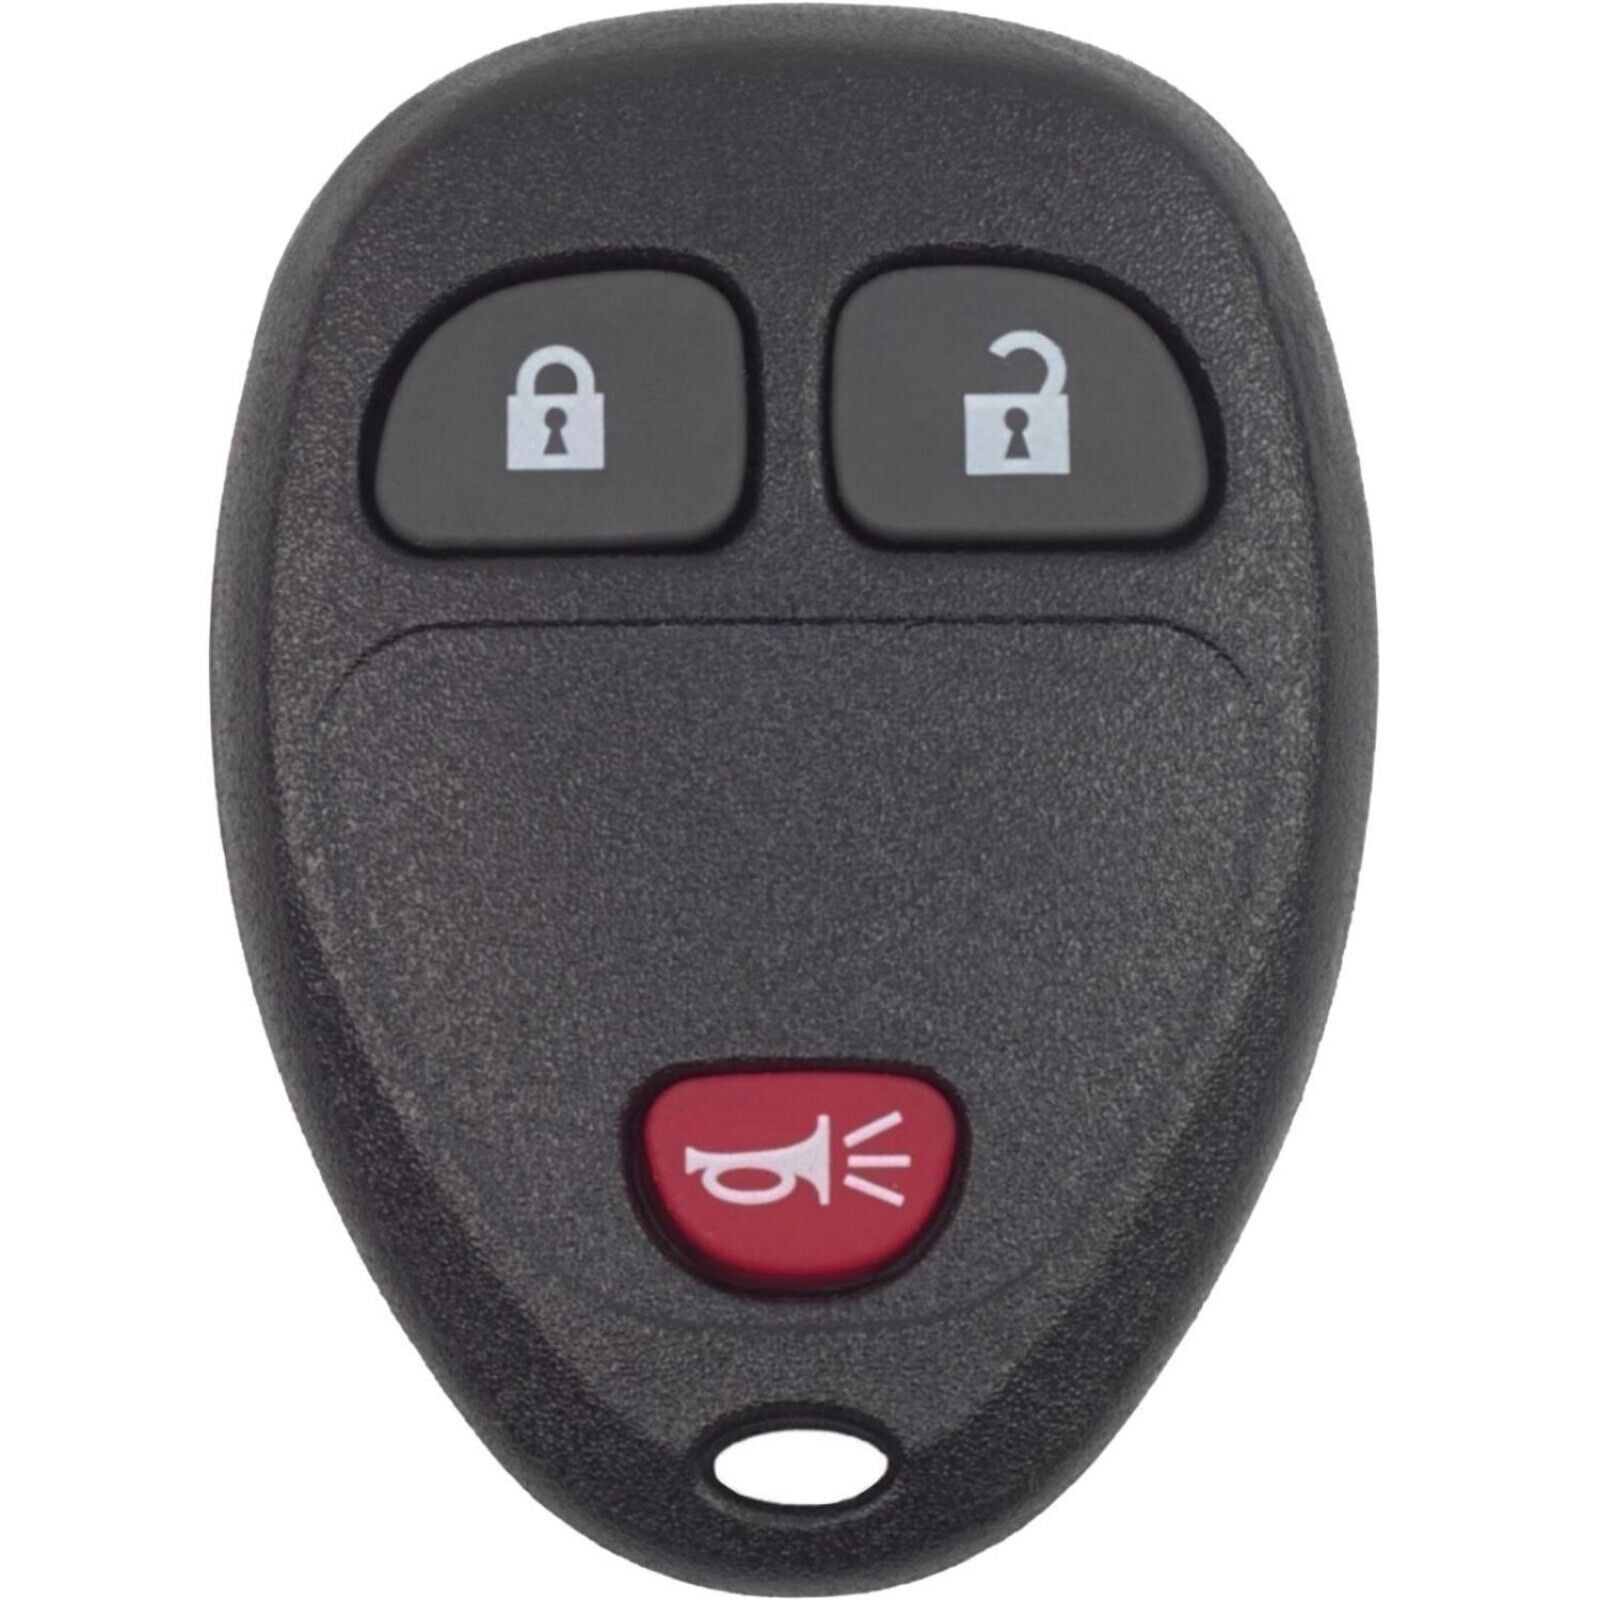 Key Fob Replacement For 2005-2007 Saturn Relay FCC ID: KOBGT04A